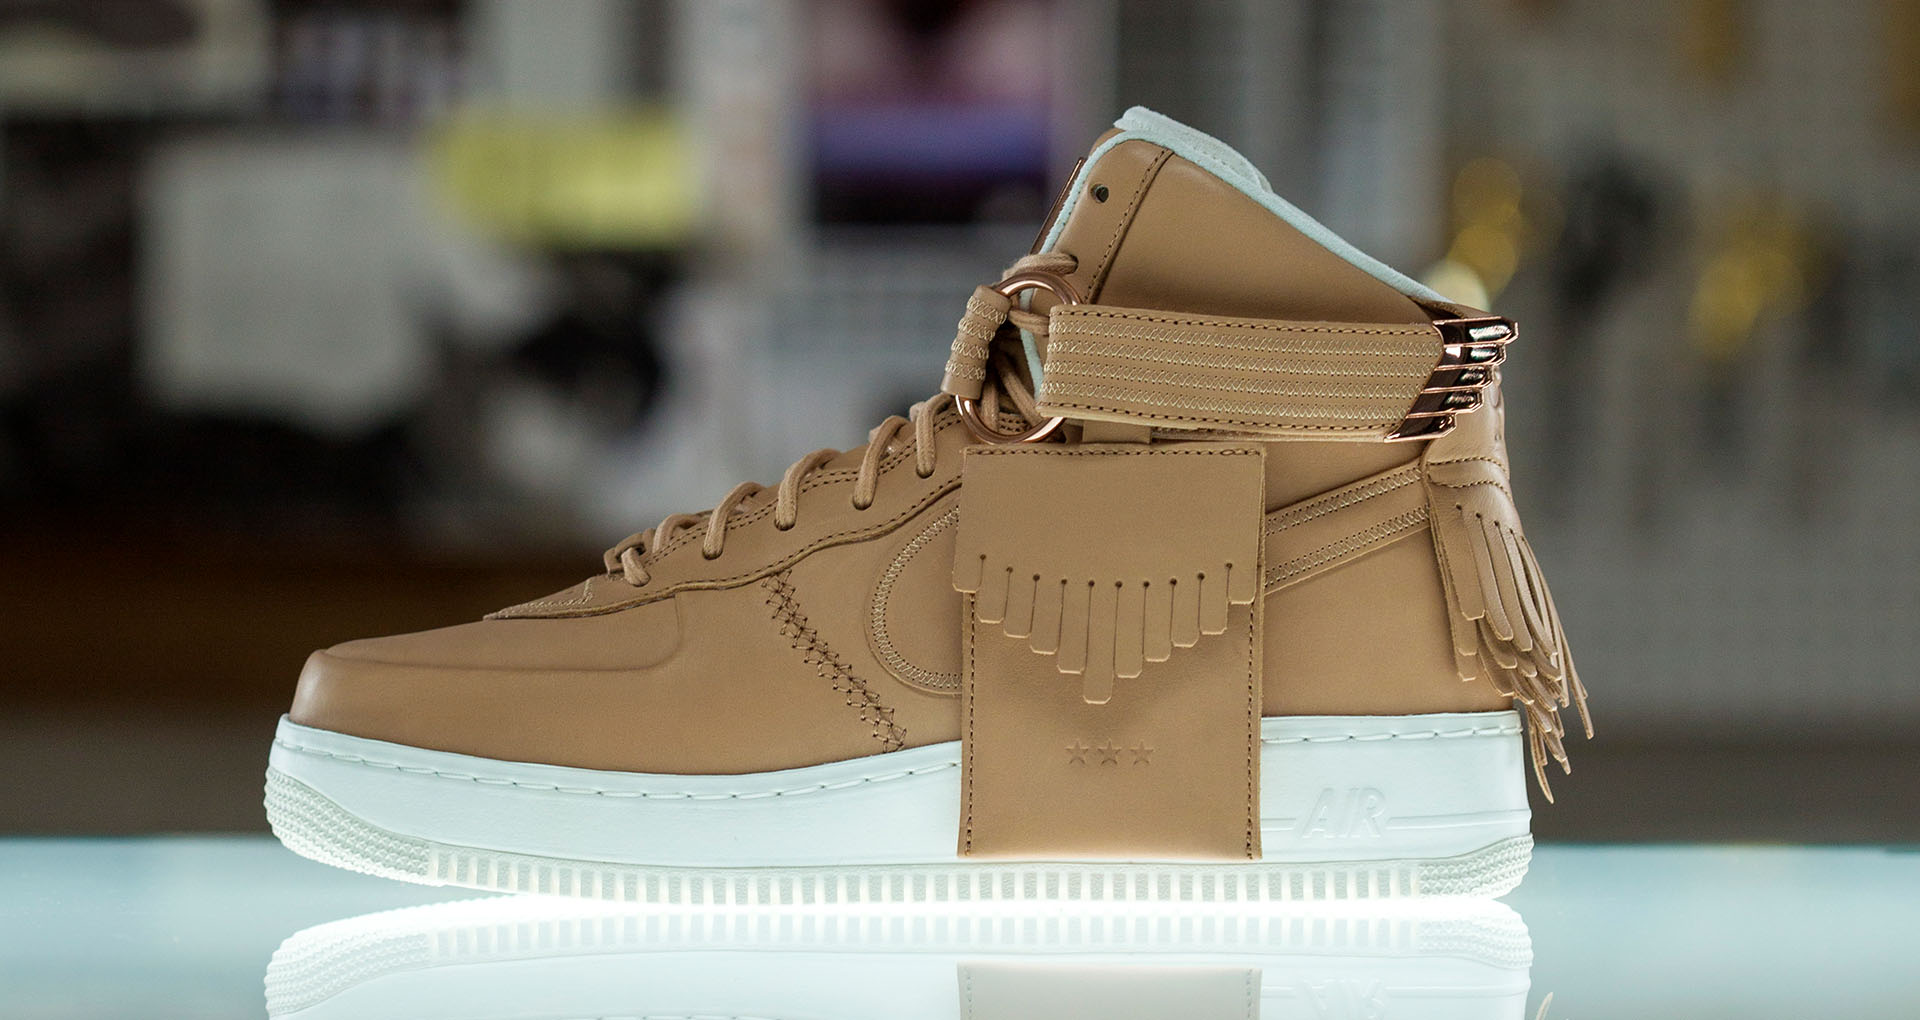 NIKE Air Force 1 high-top leather sneakers